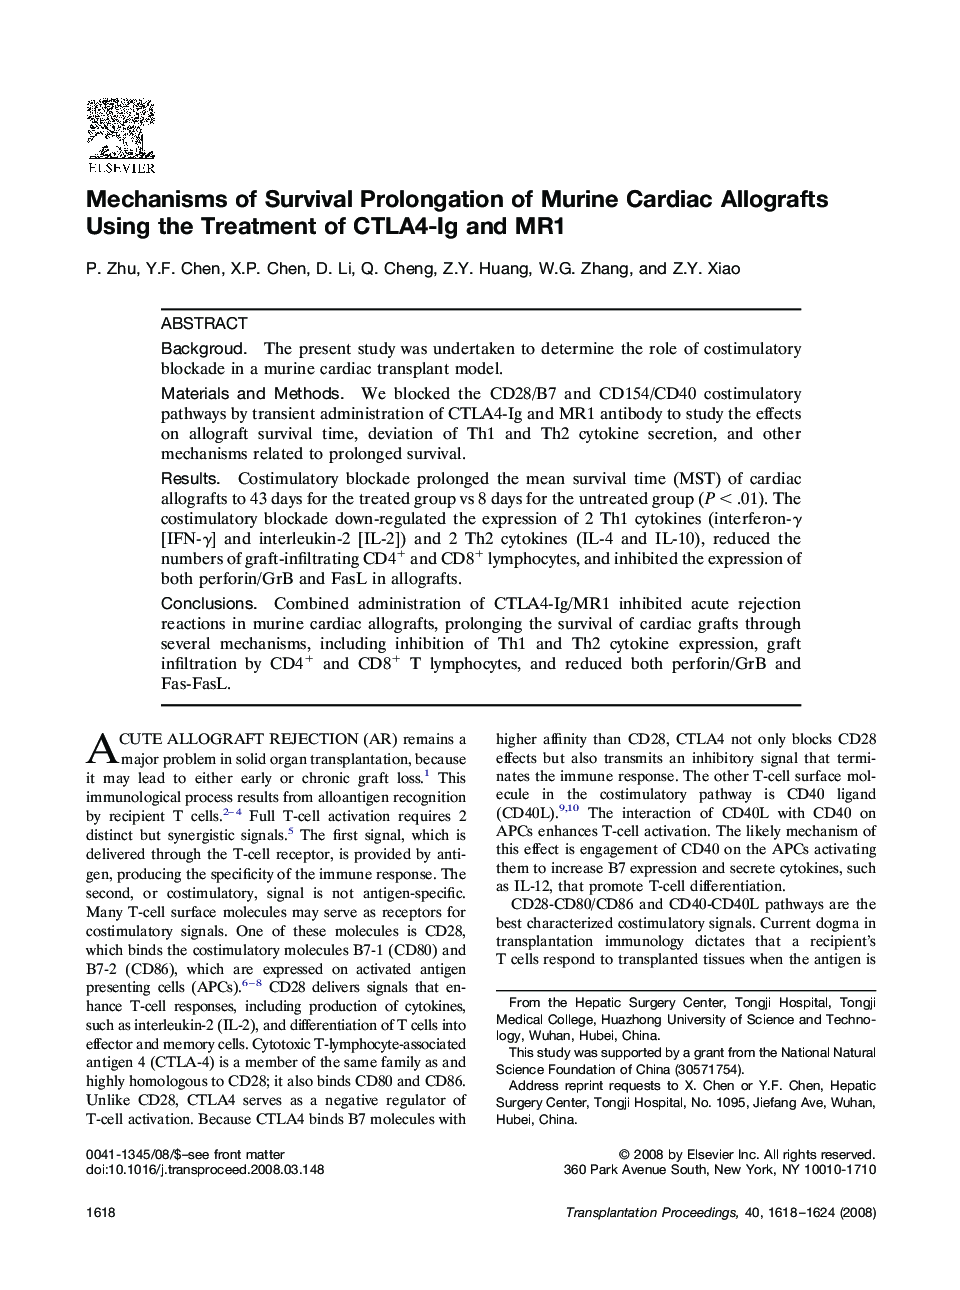 Mechanisms of Survival Prolongation of Murine Cardiac Allografts Using the Treatment of CTLA4-Ig and MR1 